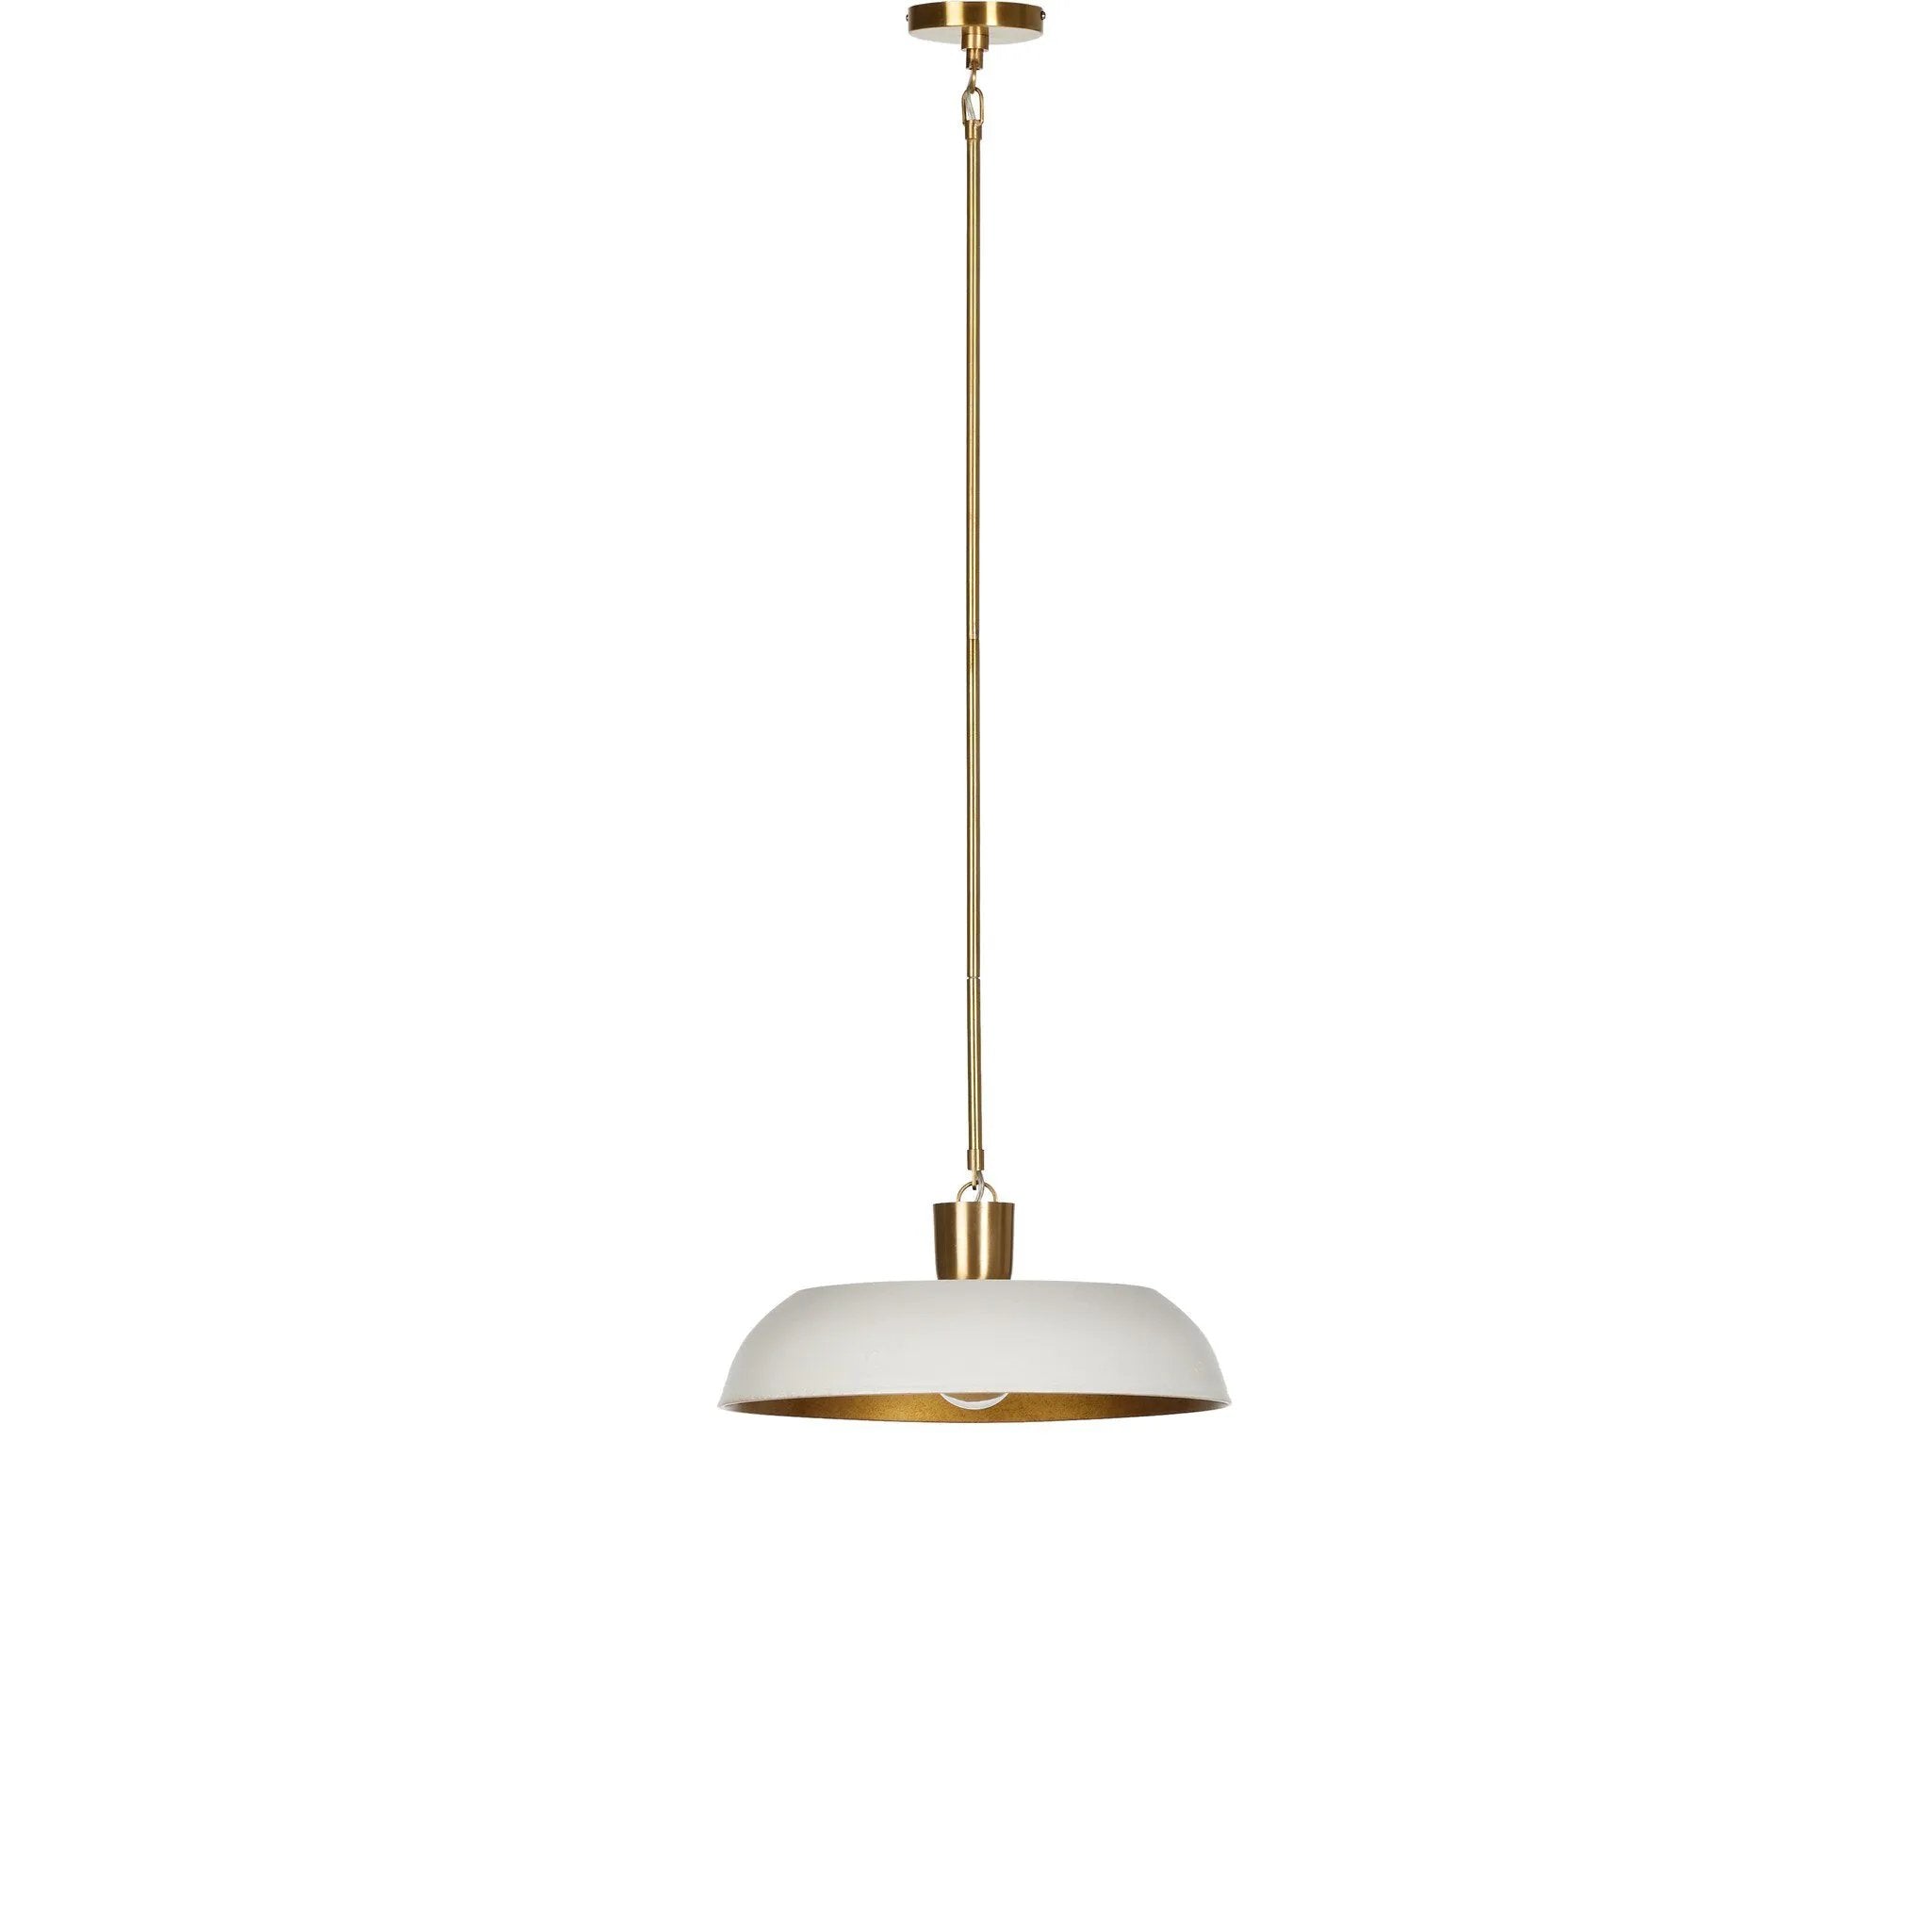 Low-profile pendant light with wide cast aluminum shade in a white textured finish. Gold leaf interior reflects to emit a warm, inviting glow that meets vintage inspiration and modern simplicity.Collection: Dan Amethyst Home provides interior design, new home construction design consulting, vintage area rugs, and lighting in the Park City metro area.